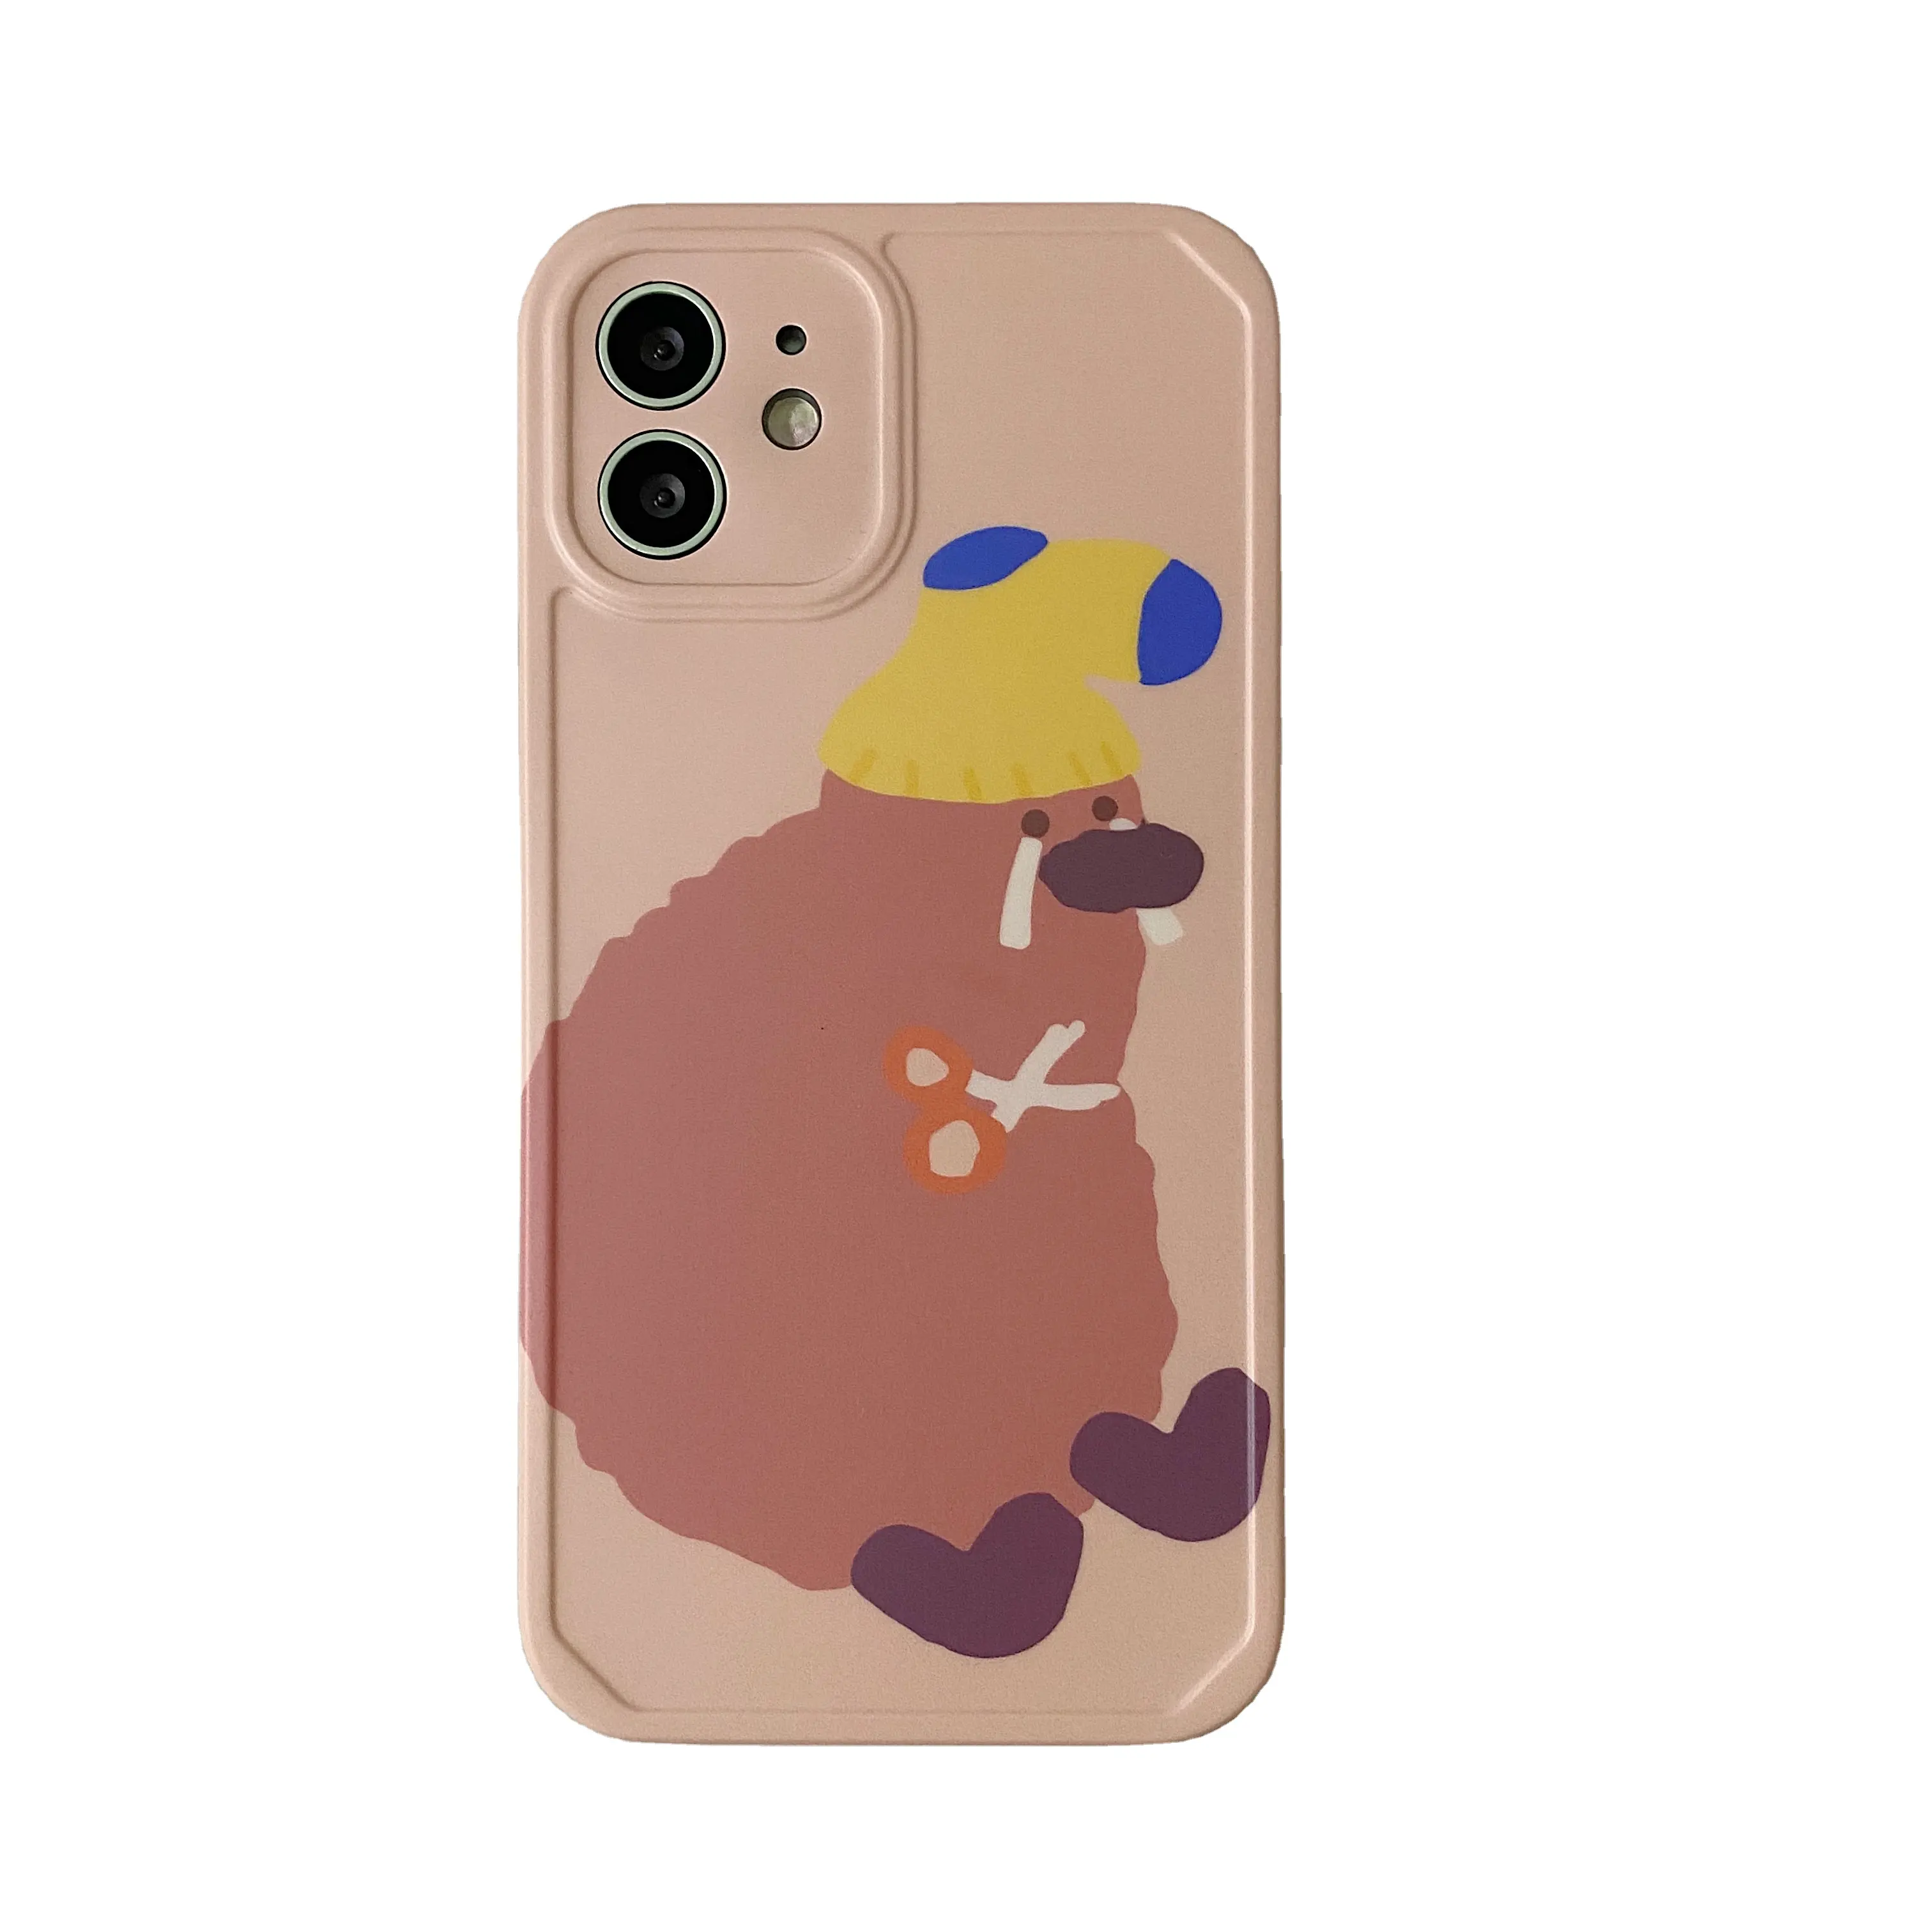 Chill Cute Shockproof Funny Cartoon Koala Pattern Design Soft Phone Protective Case Cover For iPhone 8 plus xr 11 12 13 Pro max